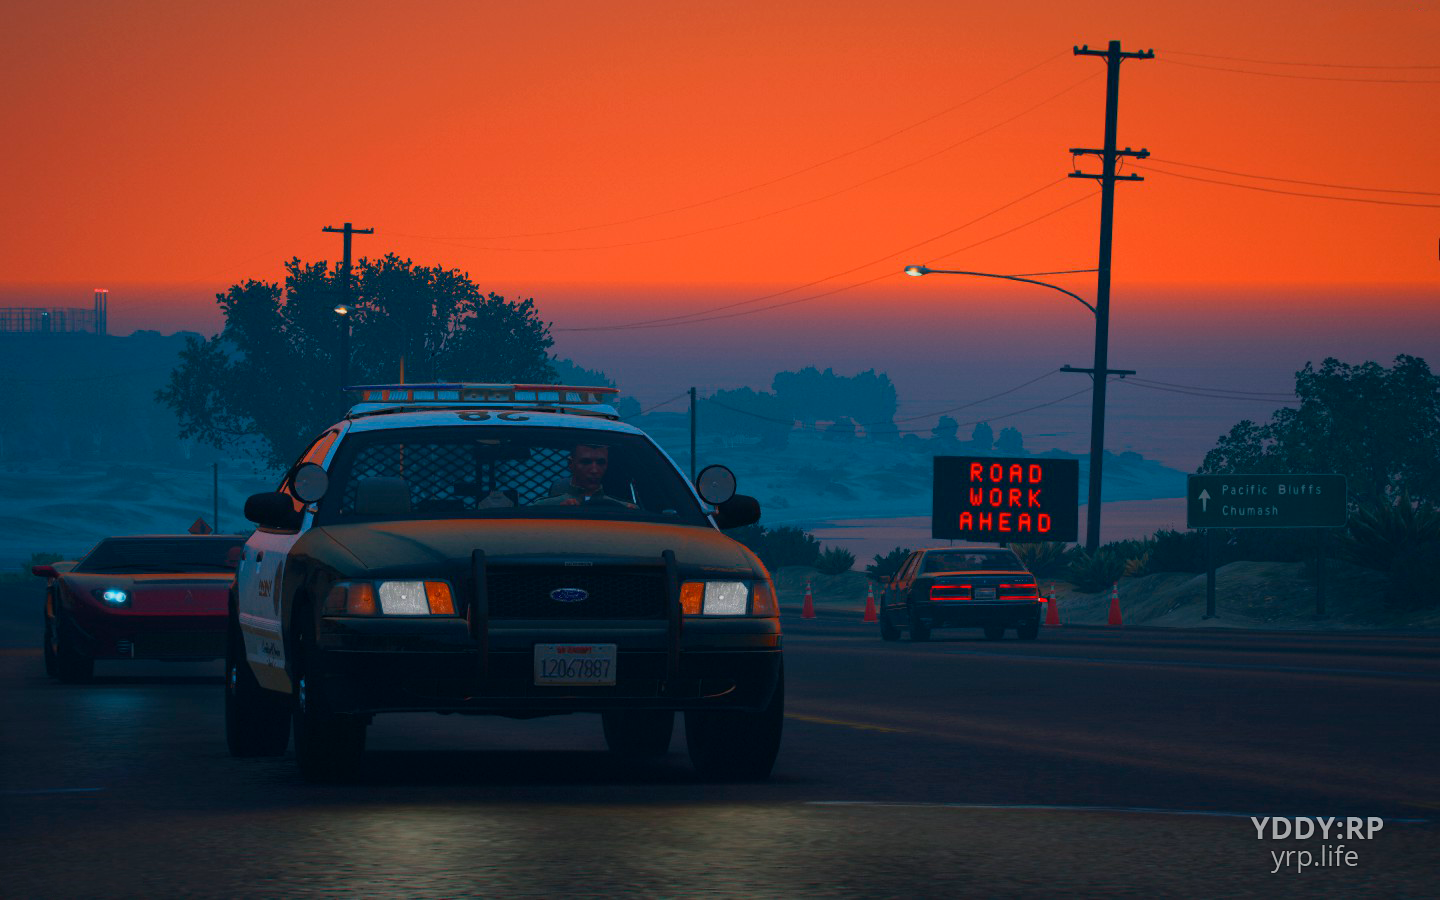 Sunset in Blaine County